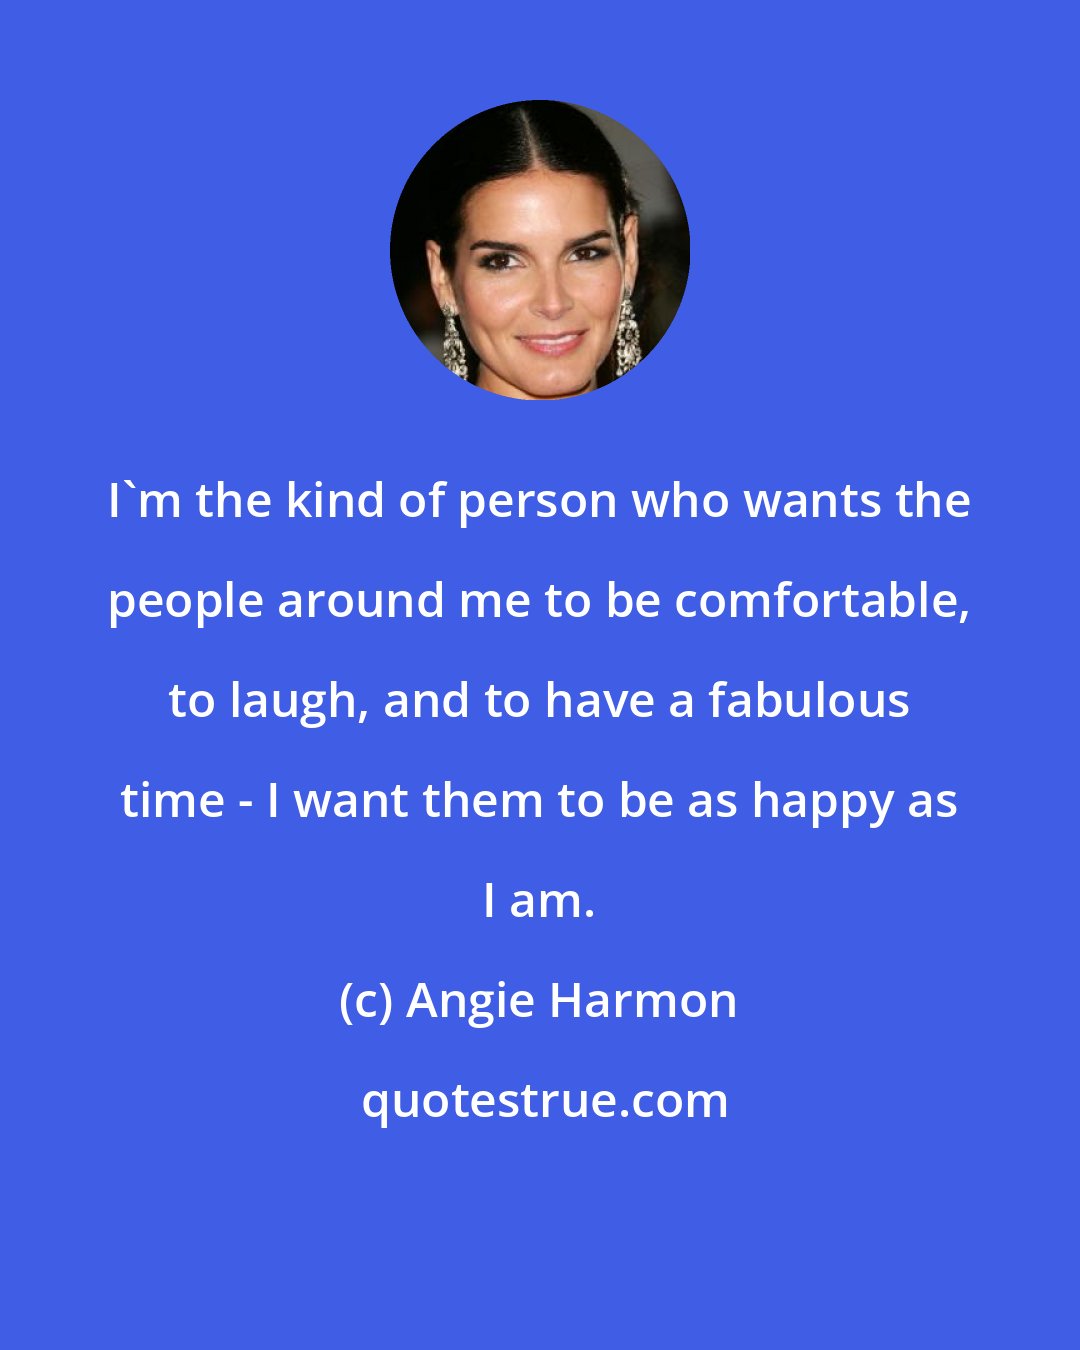 Angie Harmon: I'm the kind of person who wants the people around me to be comfortable, to laugh, and to have a fabulous time - I want them to be as happy as I am.